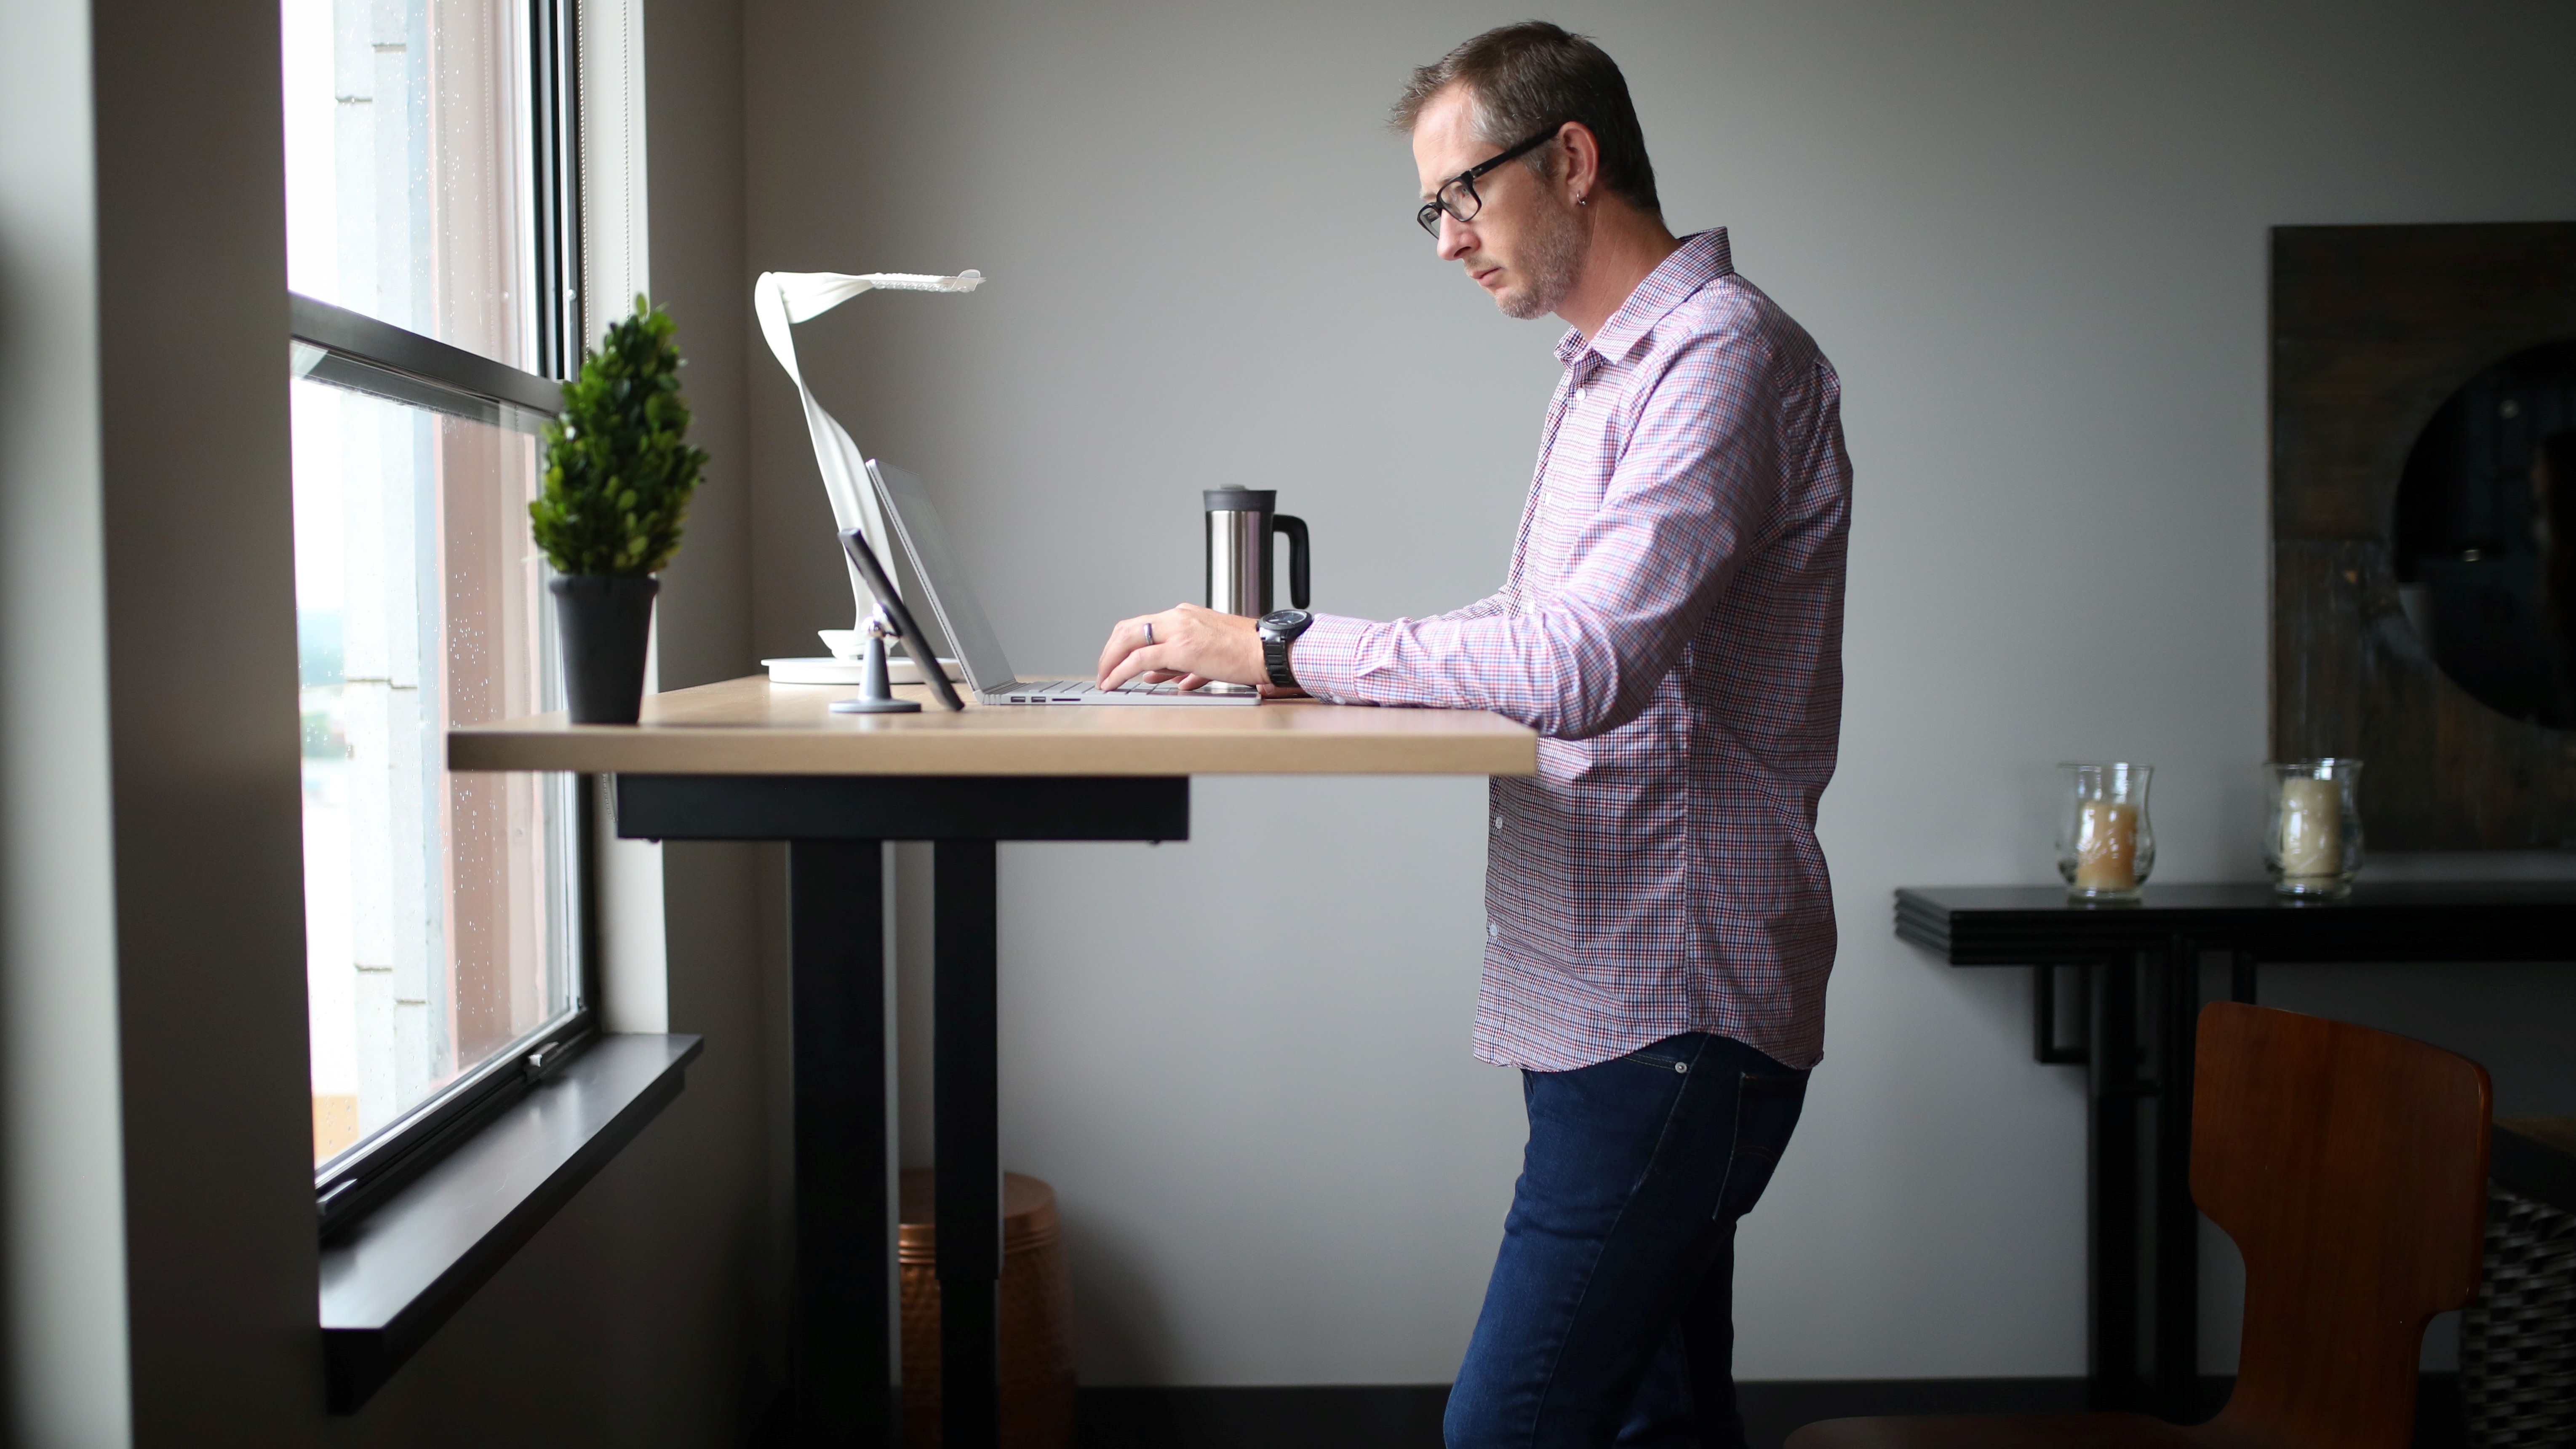 Best Standing Desk For Home Office And, Build Your Own Electric Standing Desk